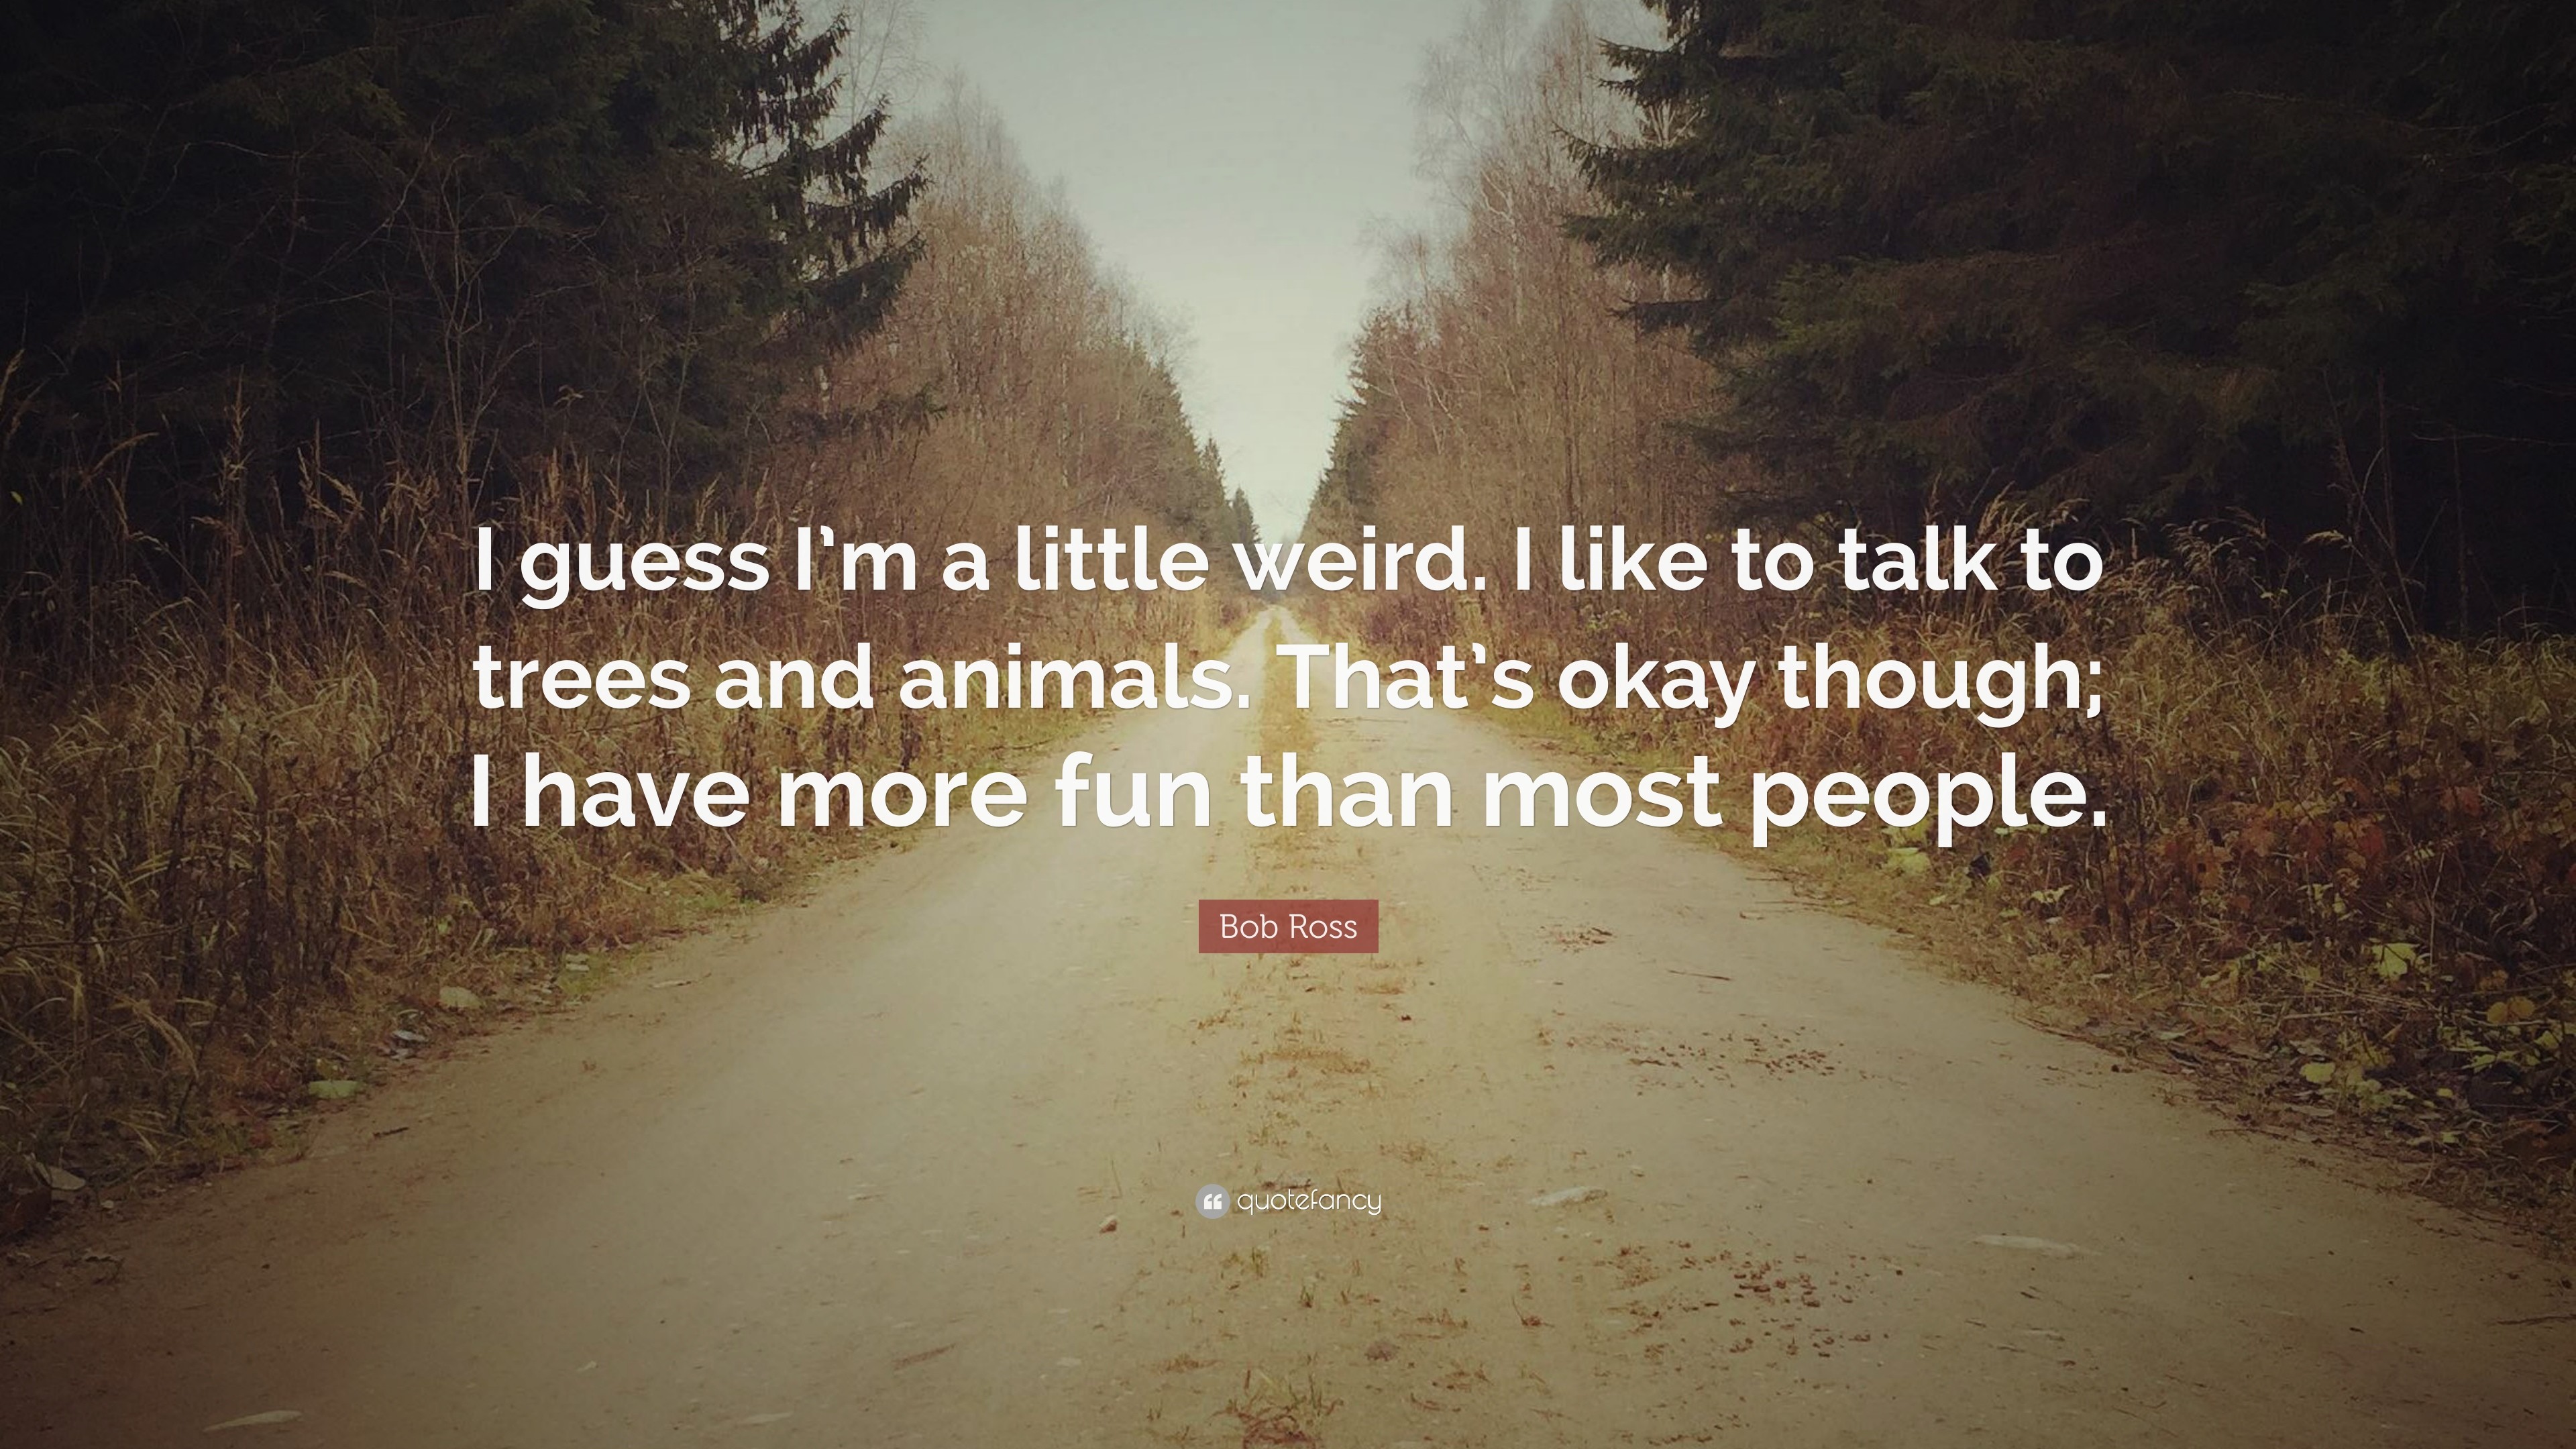 3840x2160 Bob Ross Quote: “I guess I'm a little weird. I like